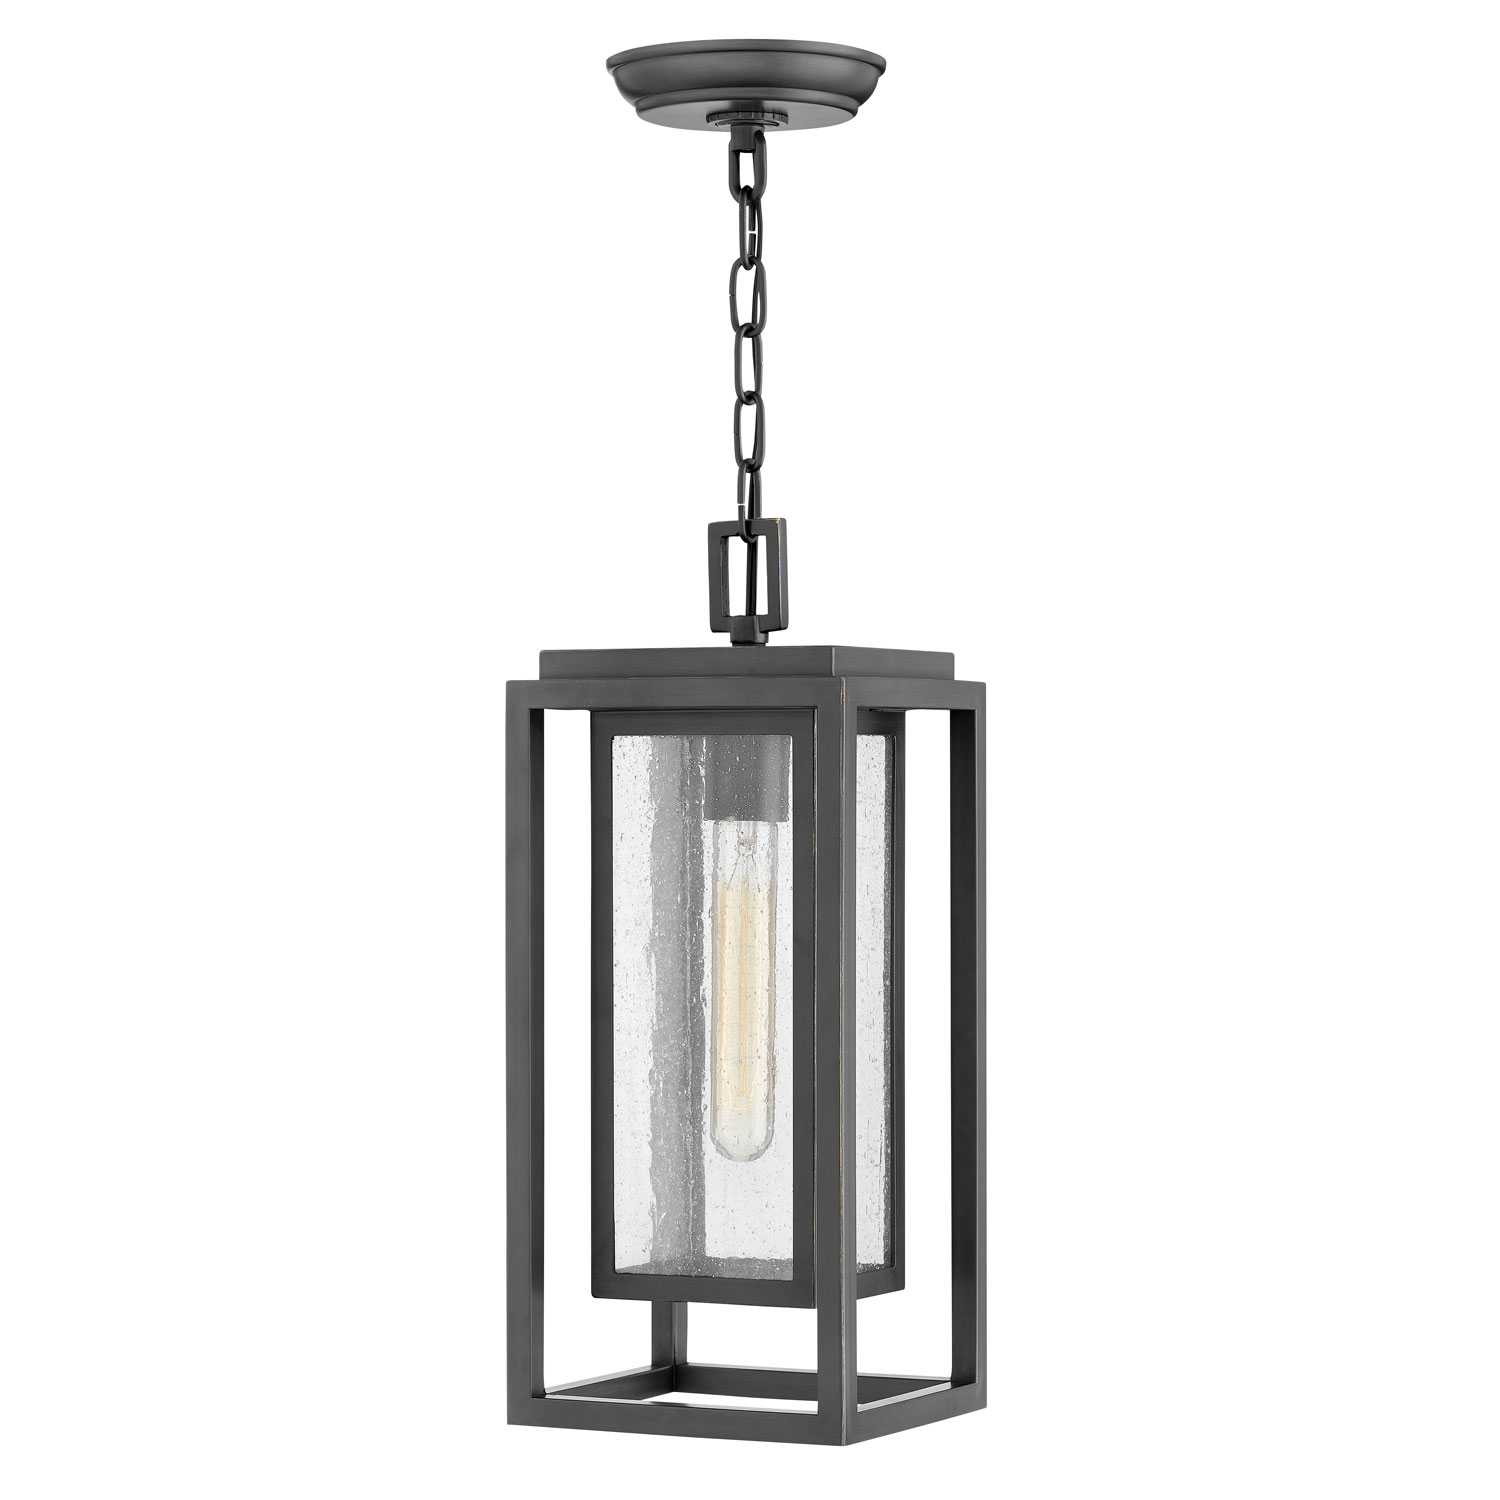 Republic Oil Rubbed Bronze One-Light Outdoor Hanging Light